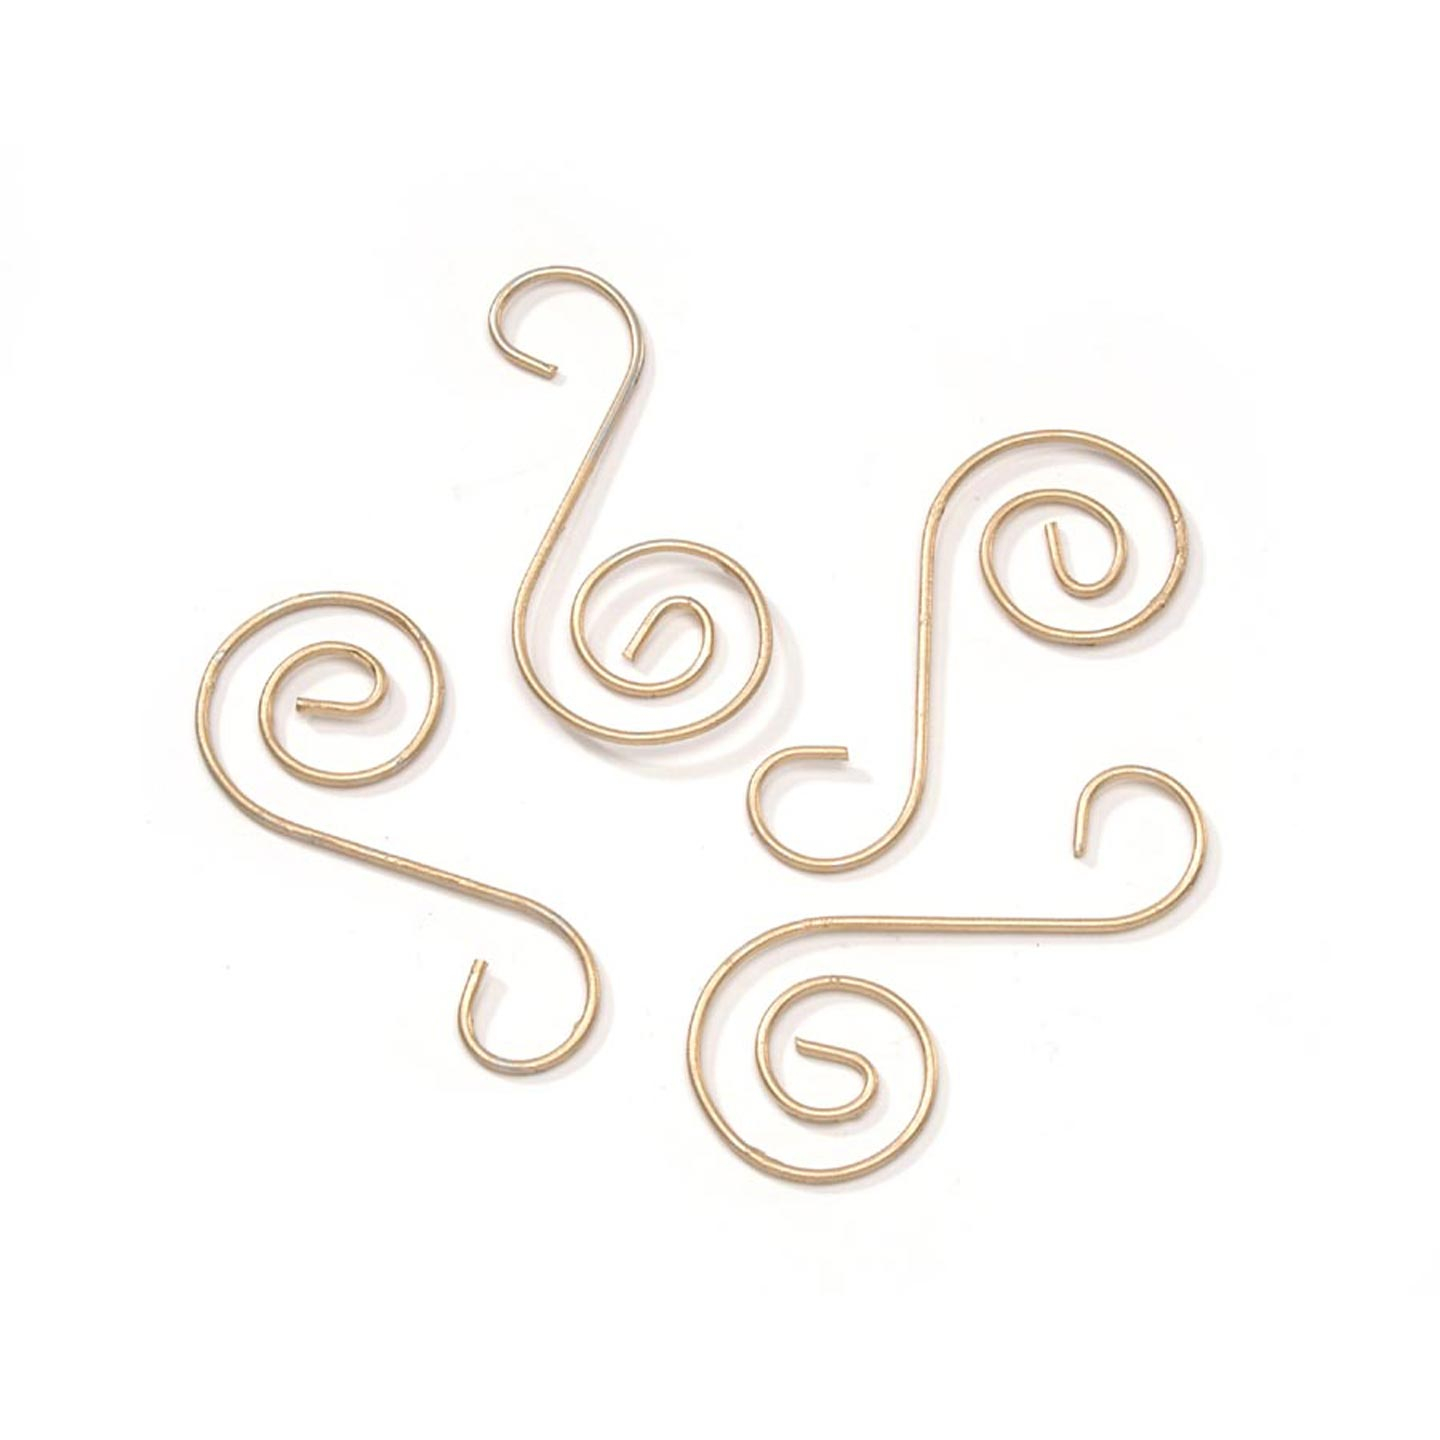 Wire Ornament Hooks in Gold set of 18.